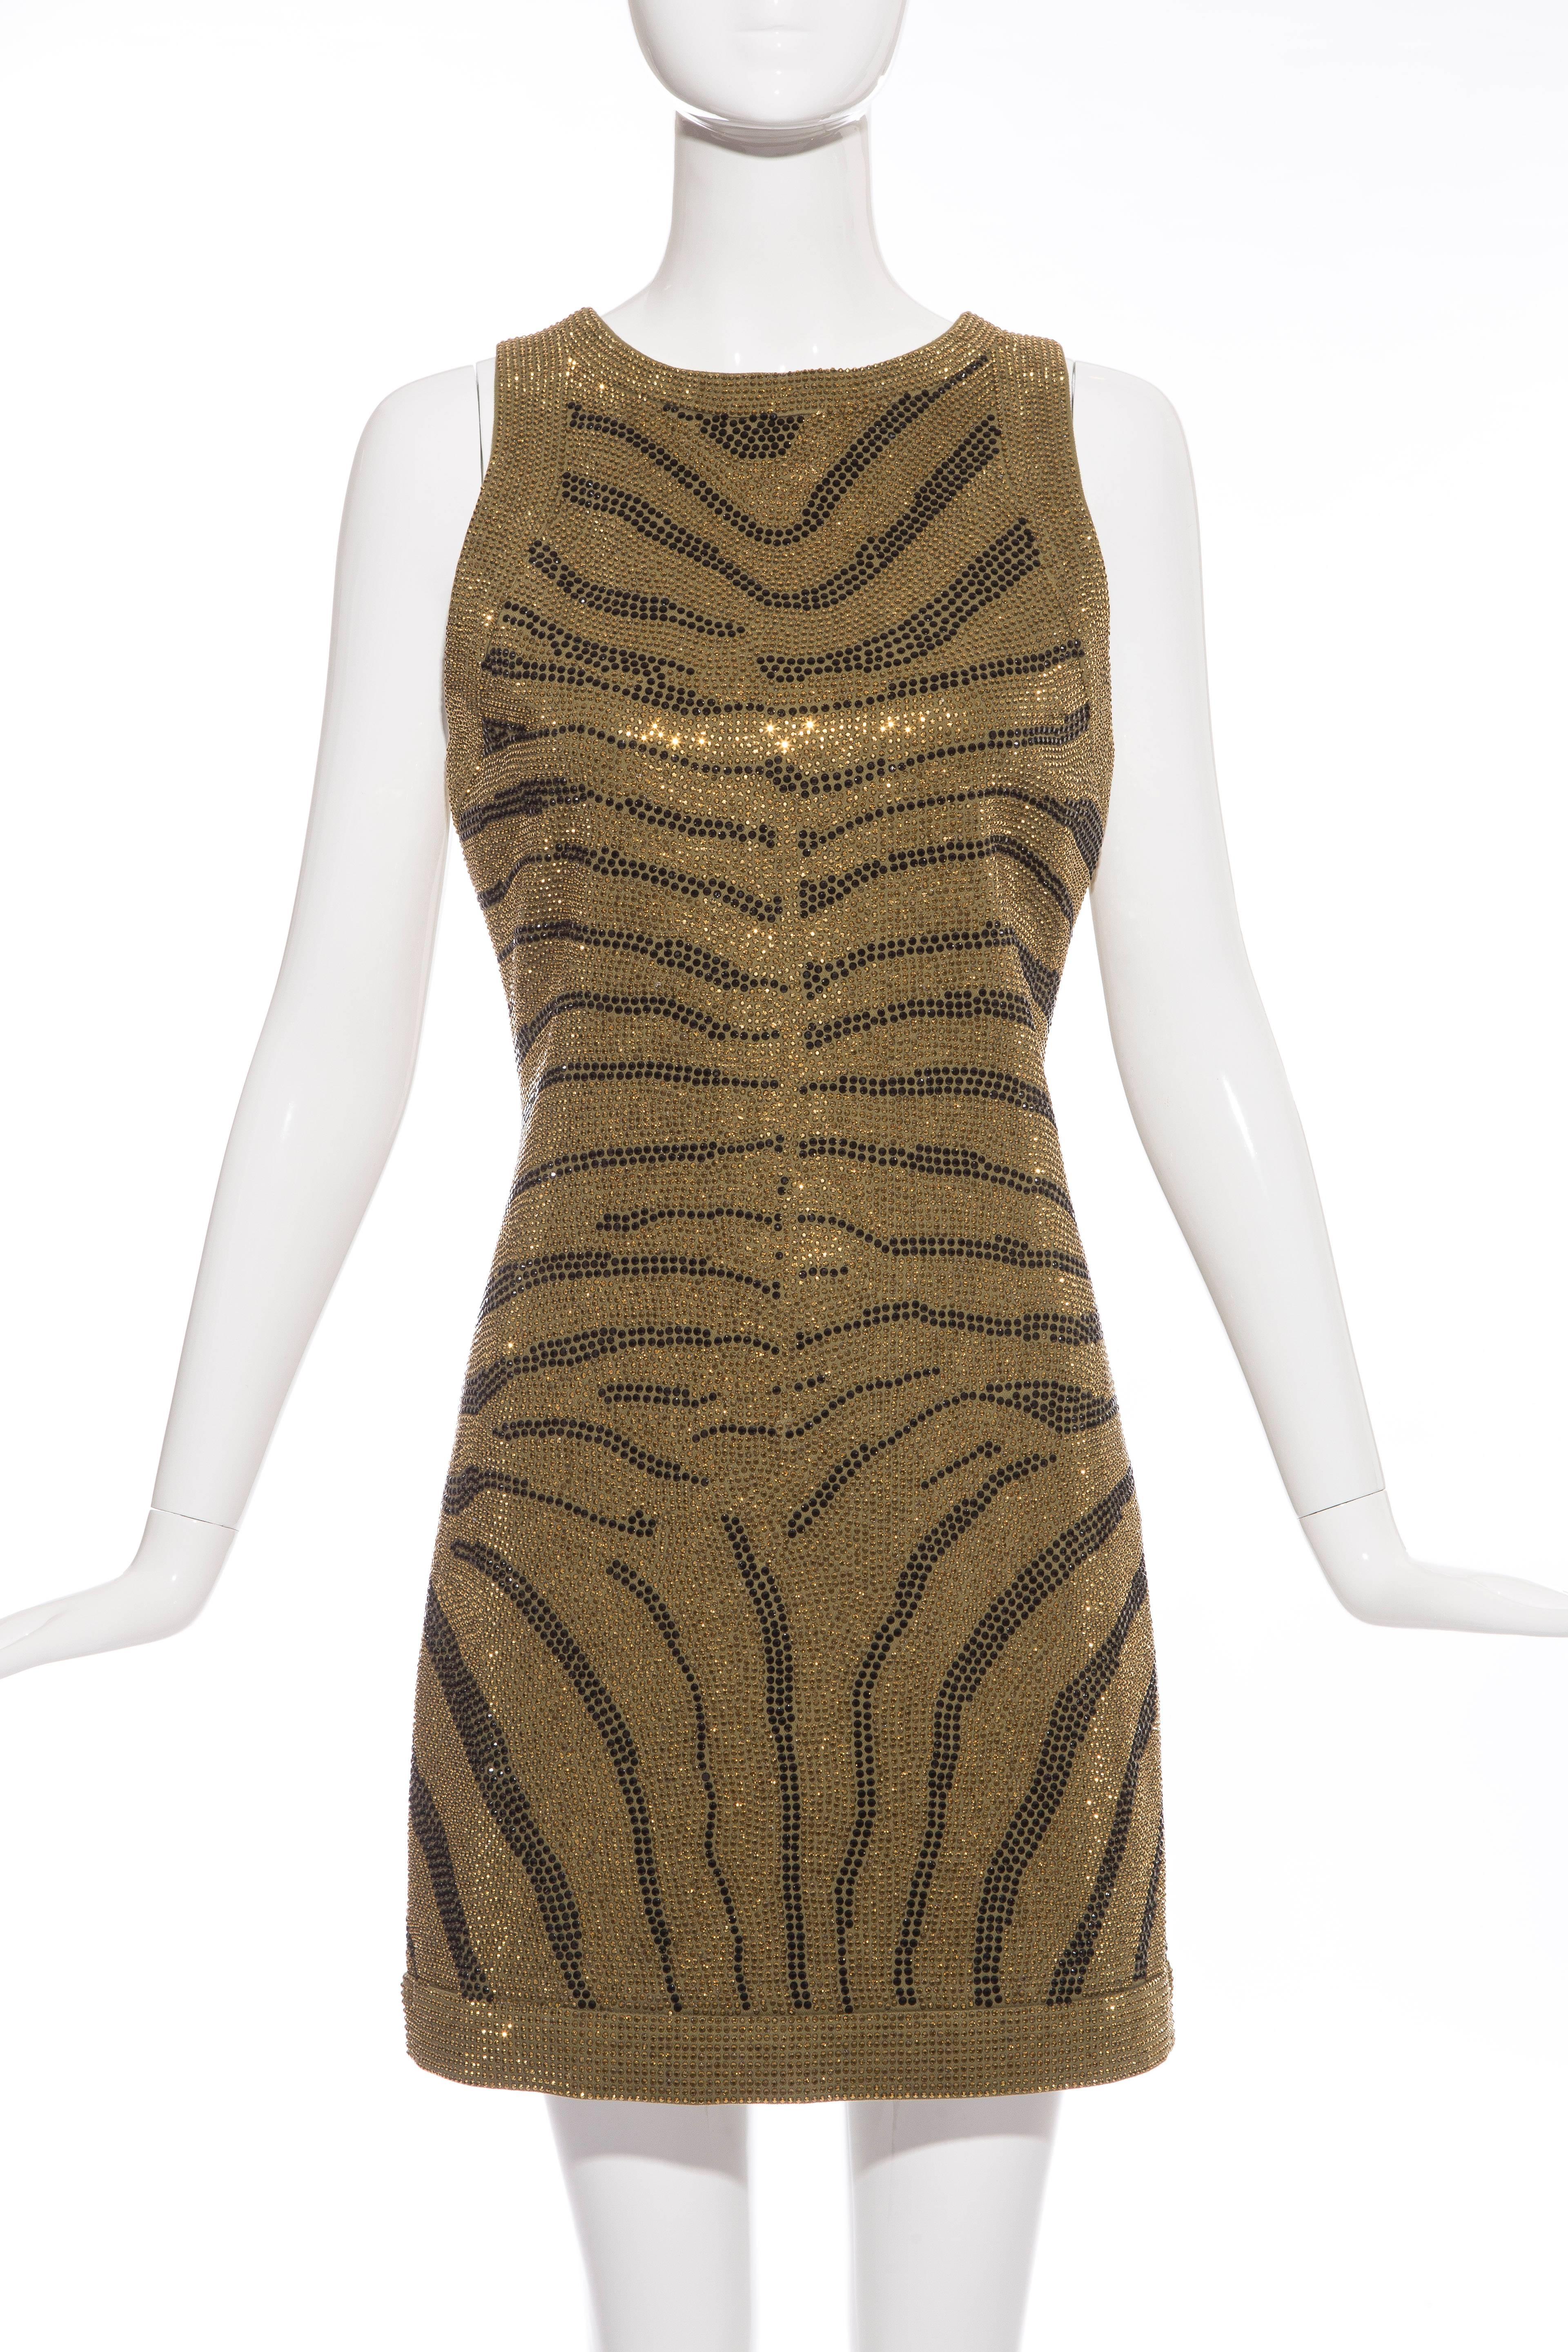 Balmain Pre-Fall 2014, olive green sleeveless dress with gold and black zebra print crystals throughout and exposed back zip closure.

EU. 38, US  6

Bust 32